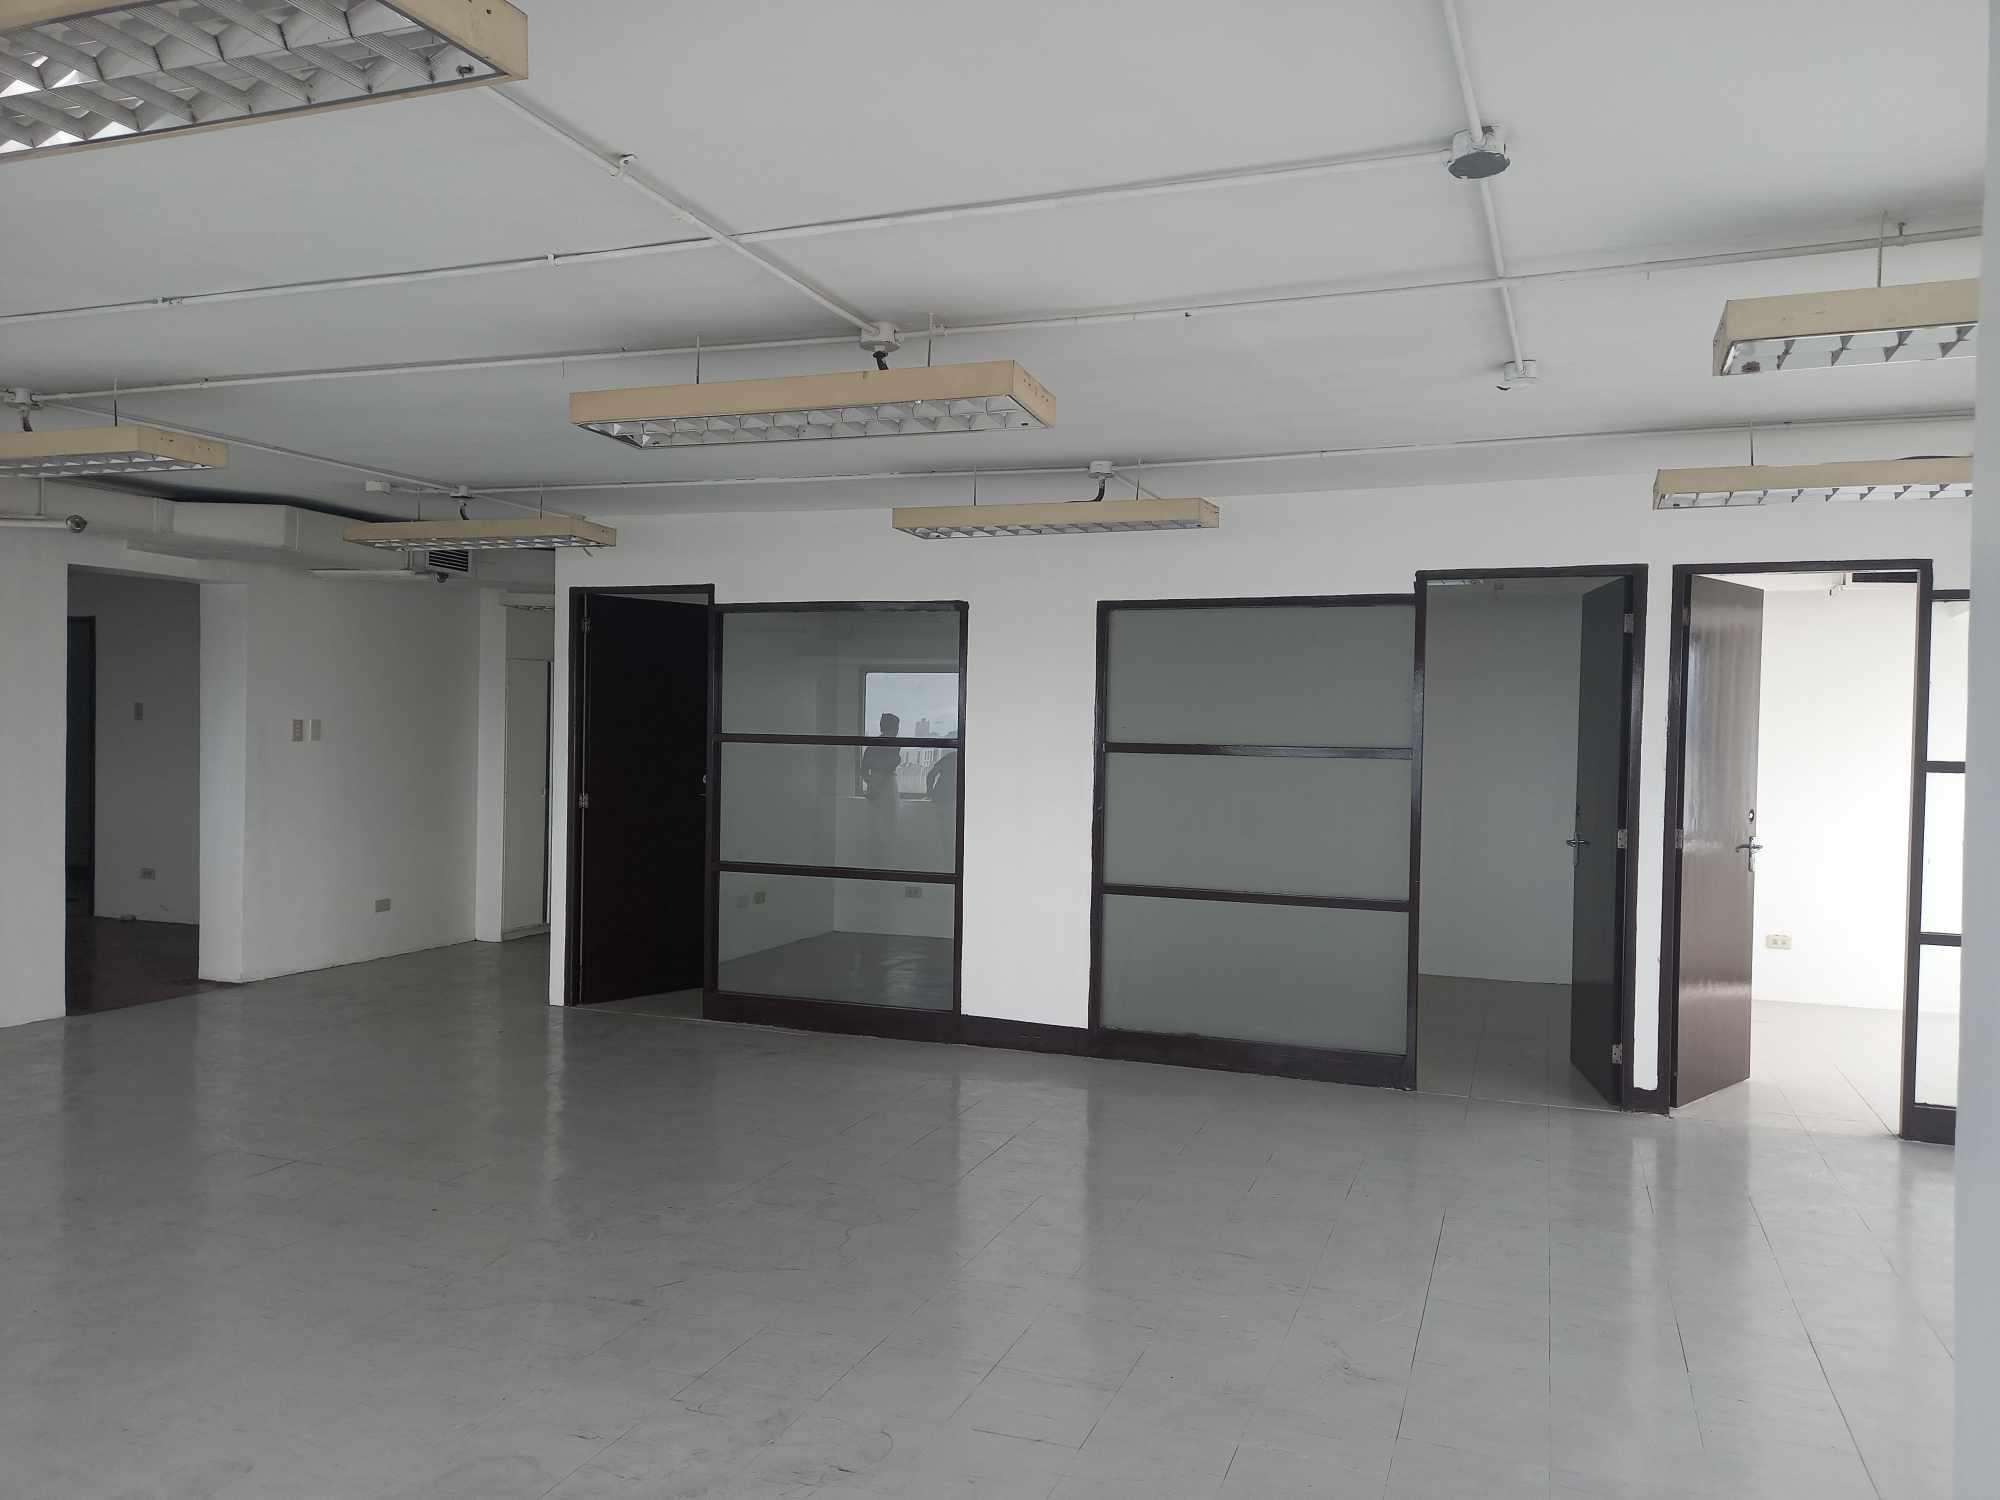 Looking for a prime PEZA office space for lease in the bustling Commercial Business District of Mandaluyong City? Look no further! Our office space offers convenient access to transportation hubs, shopping malls, restaurants, banks, and other commercial establishments. At 156.19 square meters, our office space is both spacious and affordable, with a competitive indicative rate of Php 500 pesos per square meter, or Php 78,095 per month. The space comes in a warm shell handover condition, complete with partitions, ceiling, lighting, and fire sprinkler system. The AC system is also VRF for added convenience and comfort.